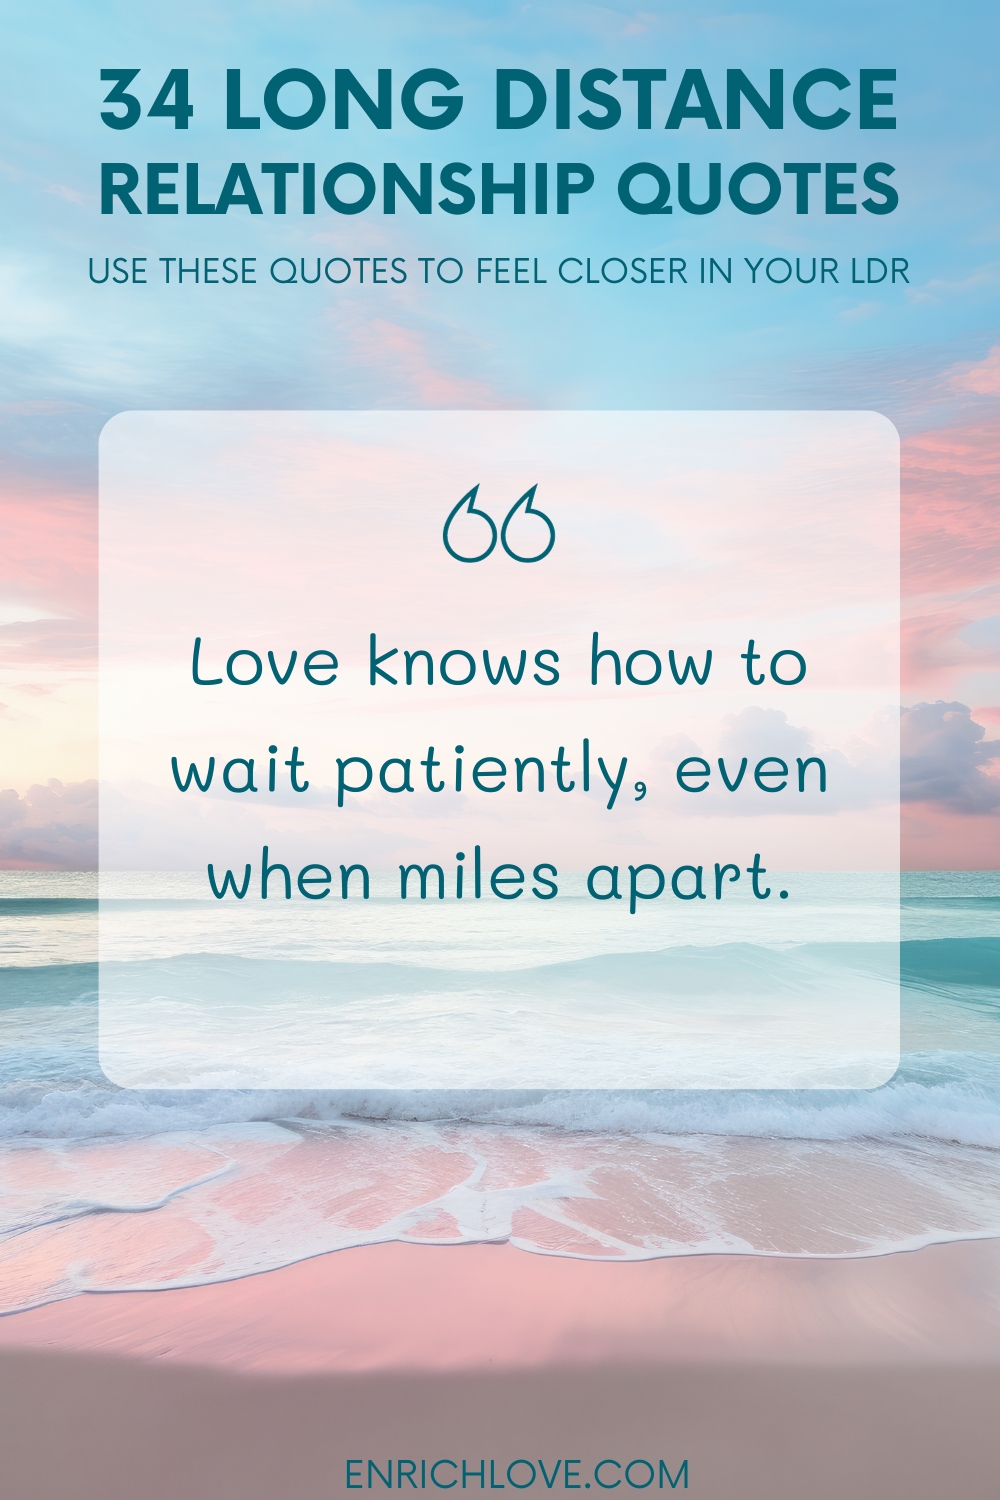 34 Long Distance Relationship Quotes - Love knows how to wait patiently, even when miles apart.